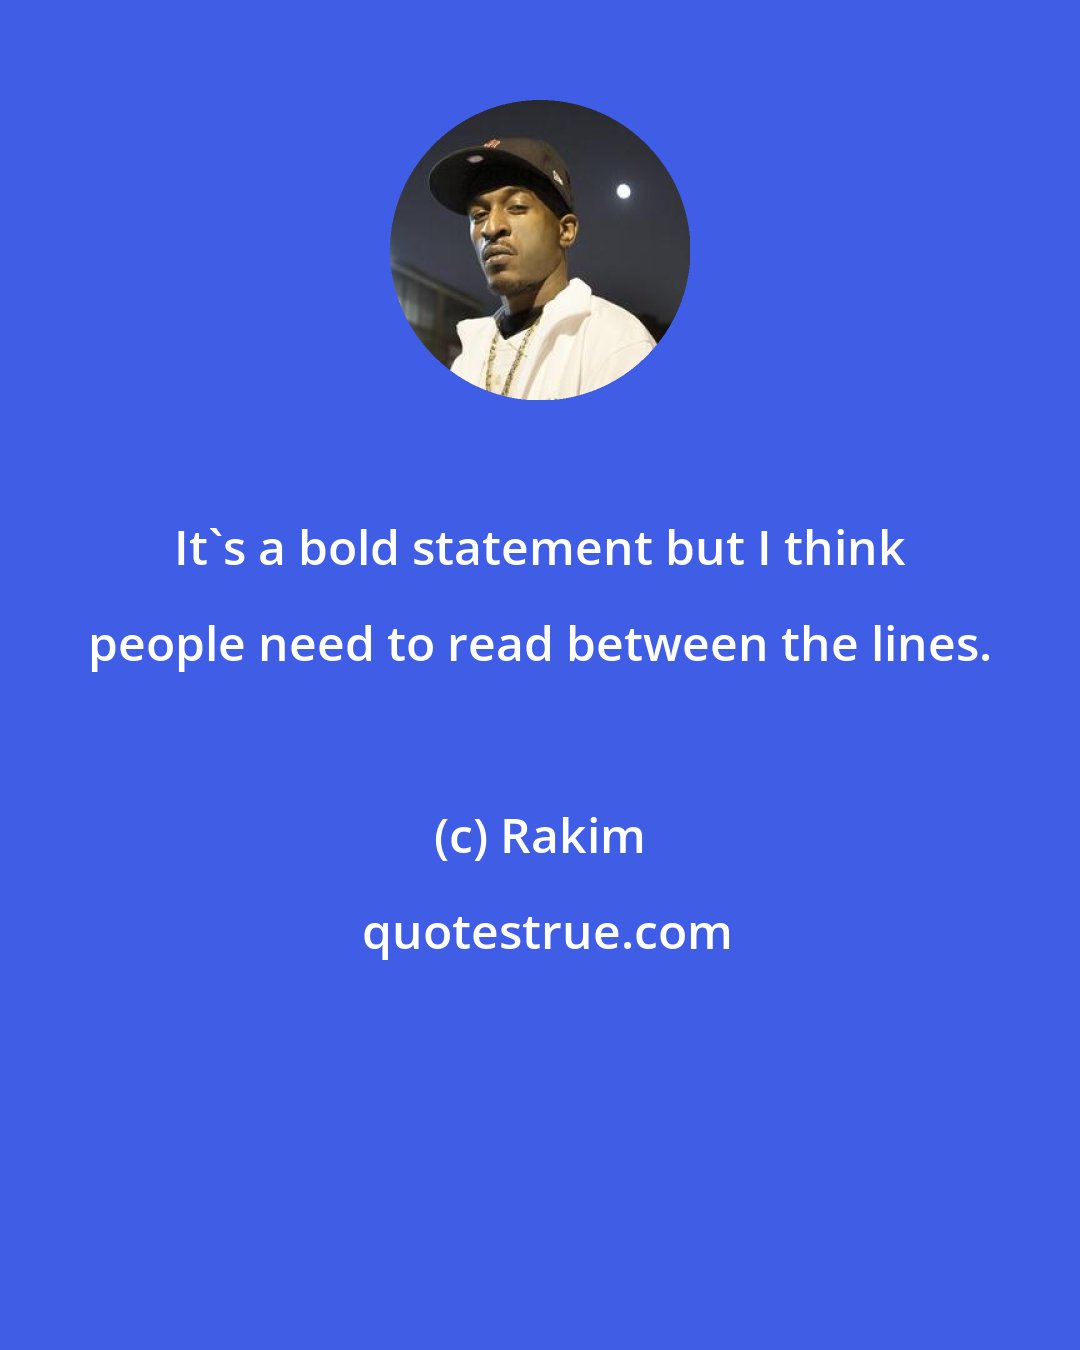 Rakim: It's a bold statement but I think people need to read between the lines.